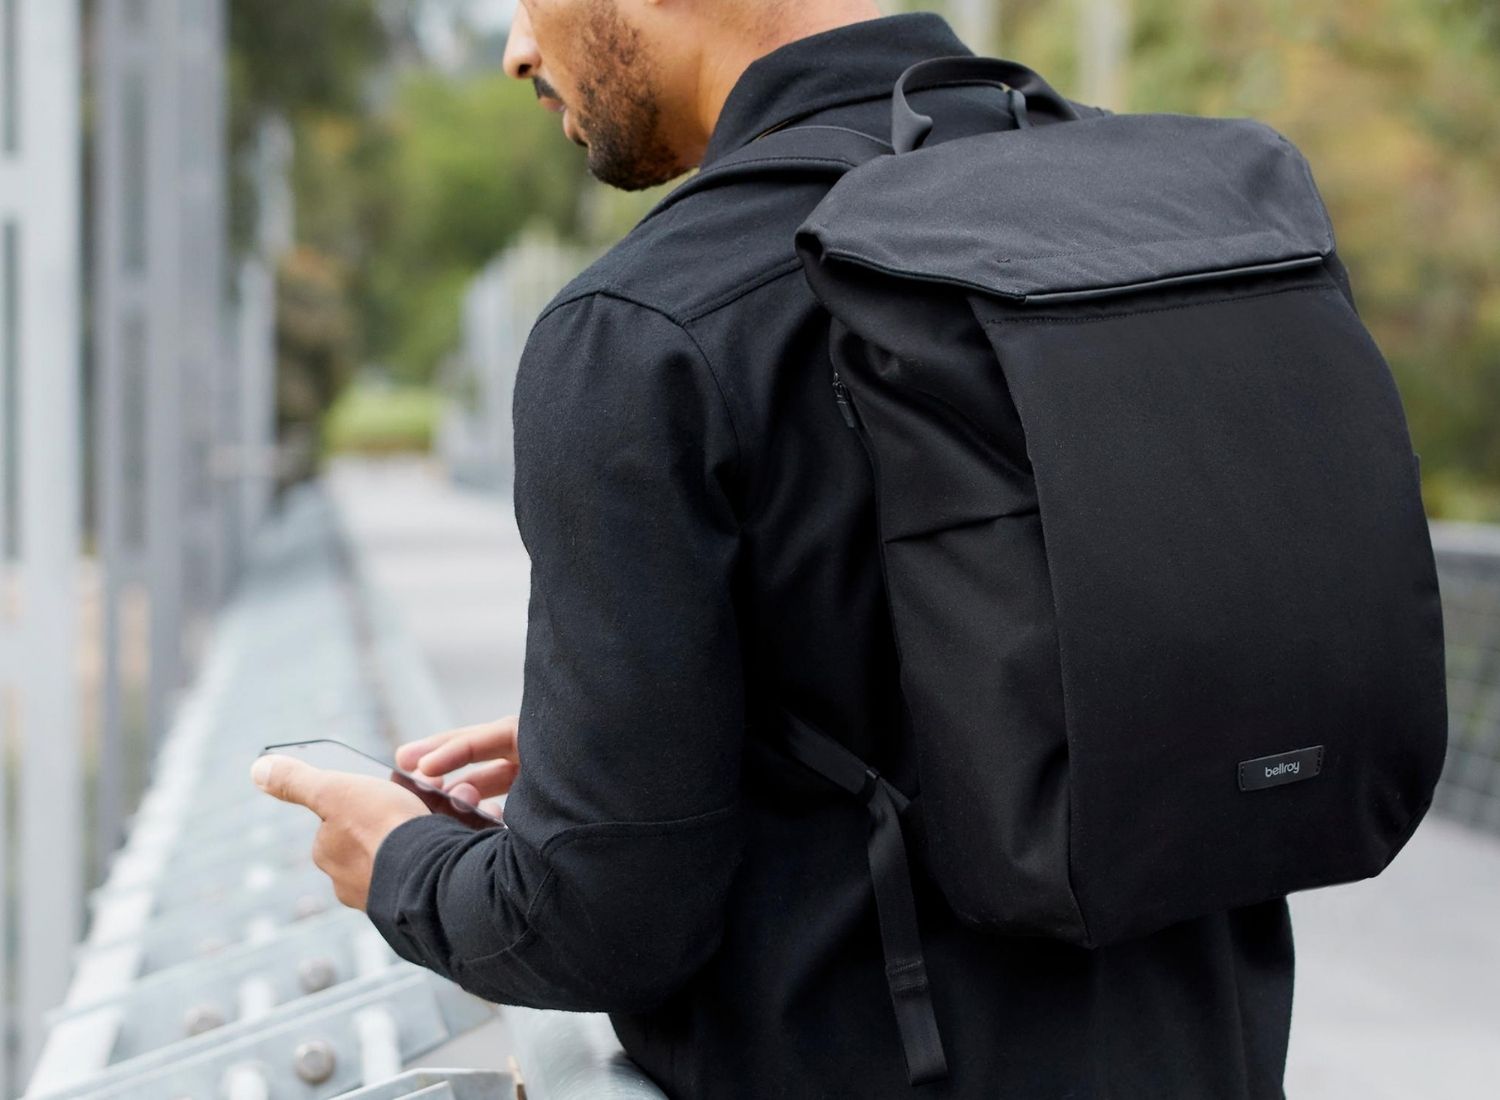 Features to Consider When Buying a Branded Laptop Backpack